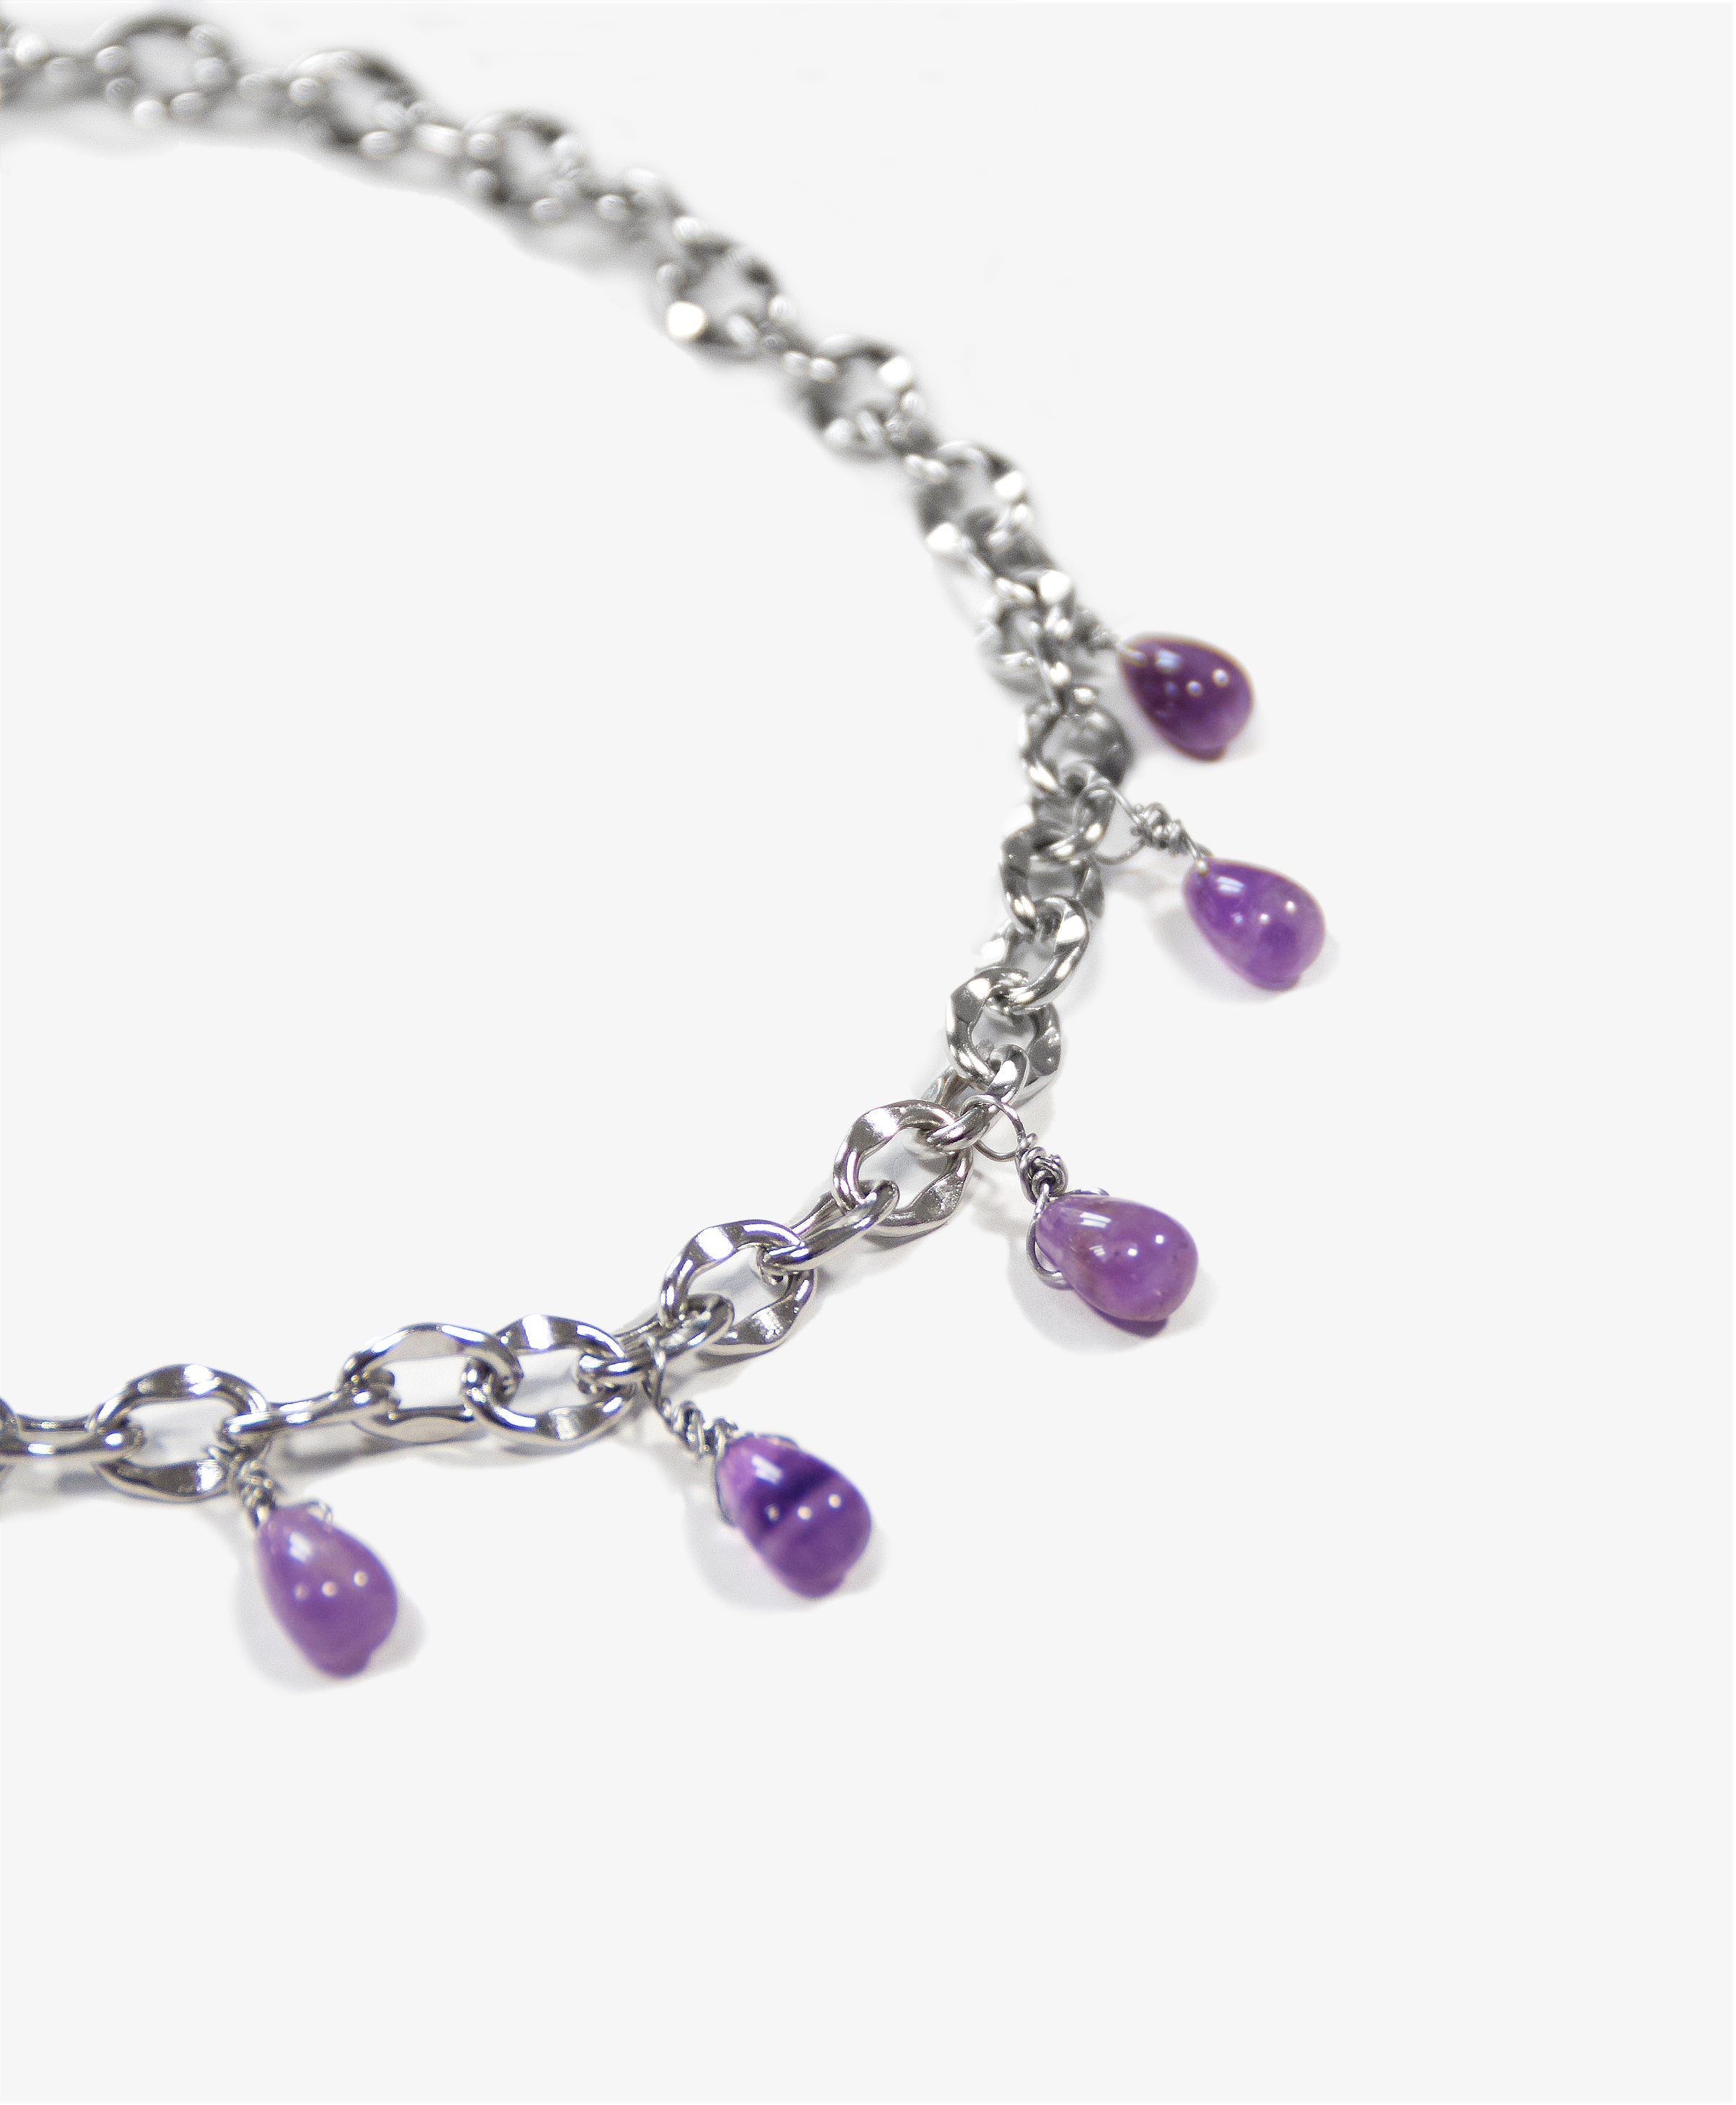 llayers-mens-women-jewelry-silver-stainlesssteel-choker-chain-necklace-unchained-000-amethyst-Brooklyn-New-York-F2